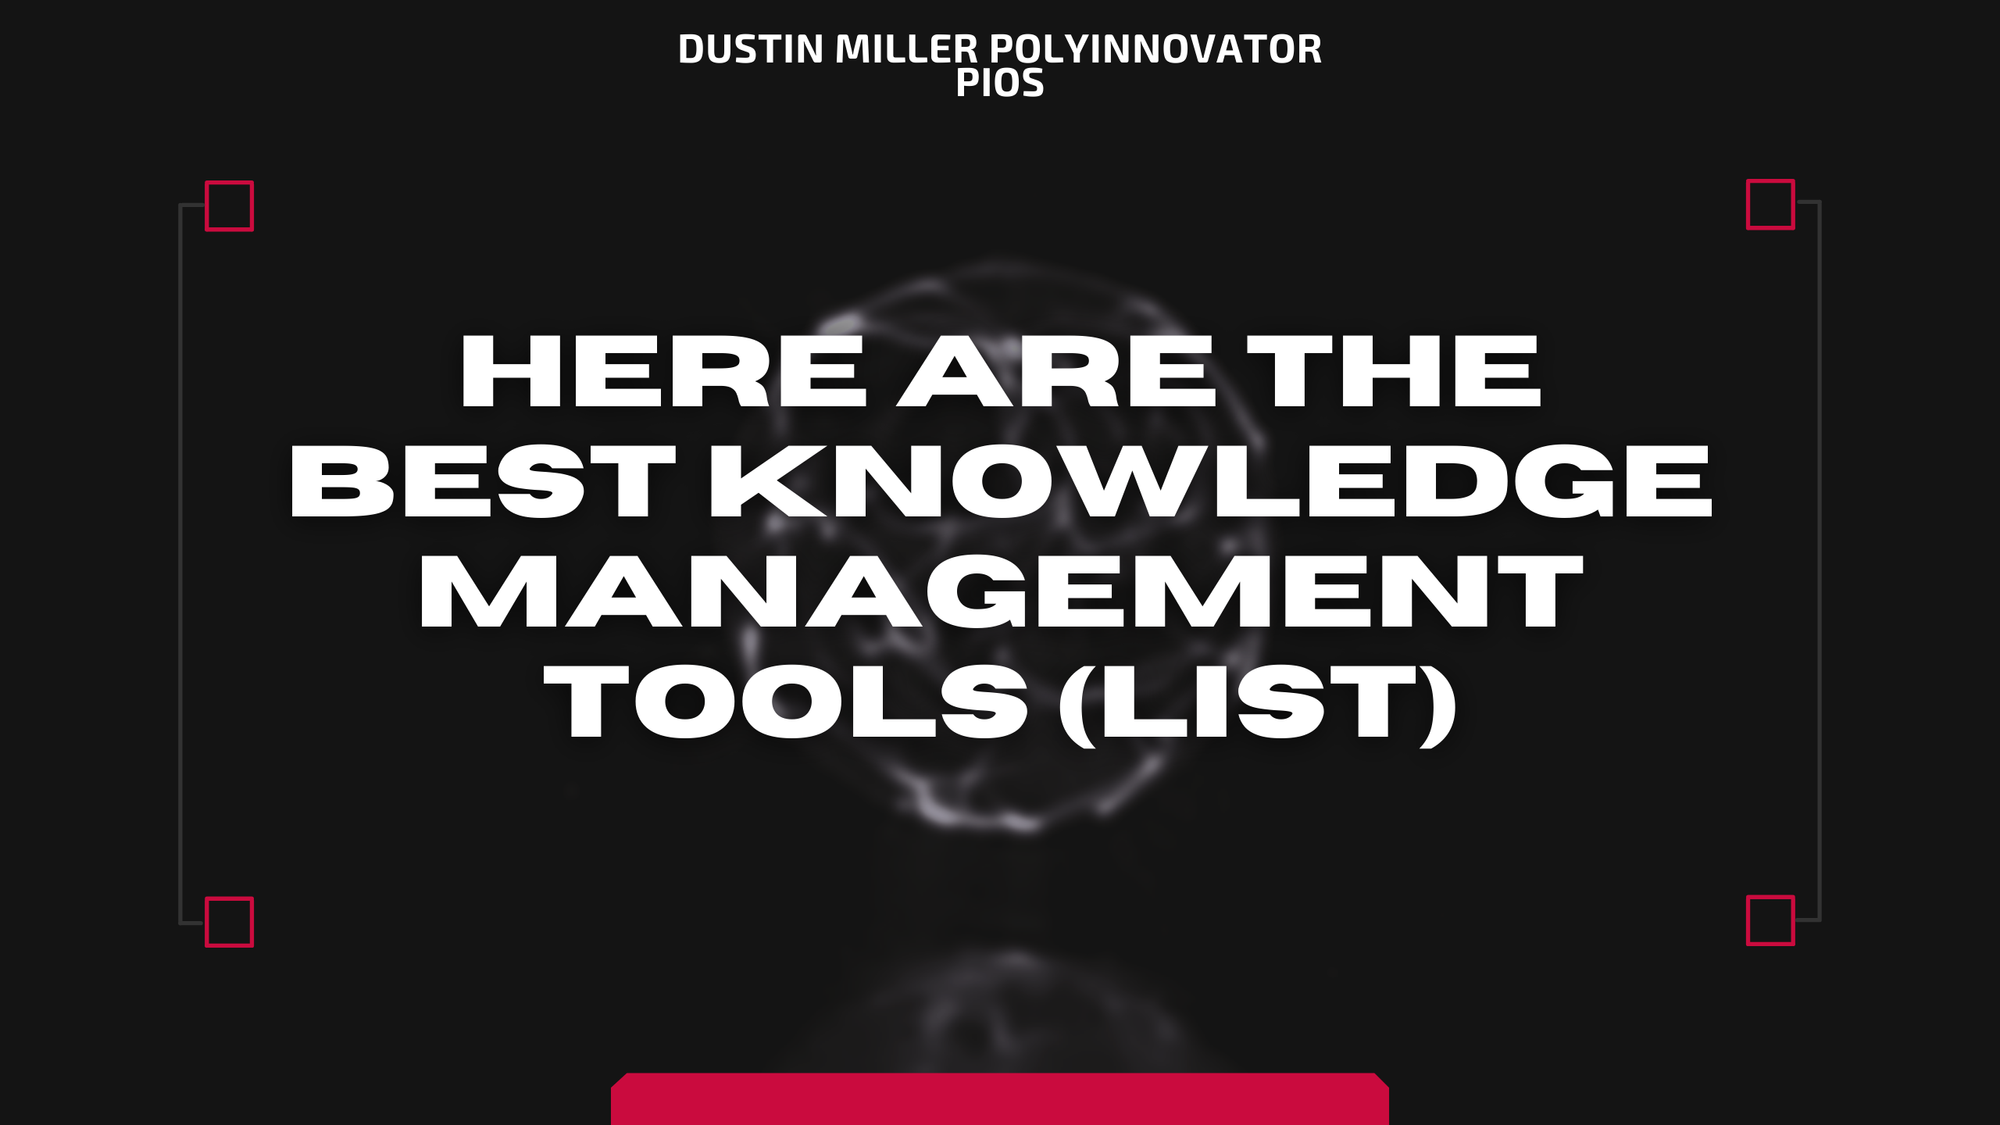 Here are the BEST knowledge management tools (List)